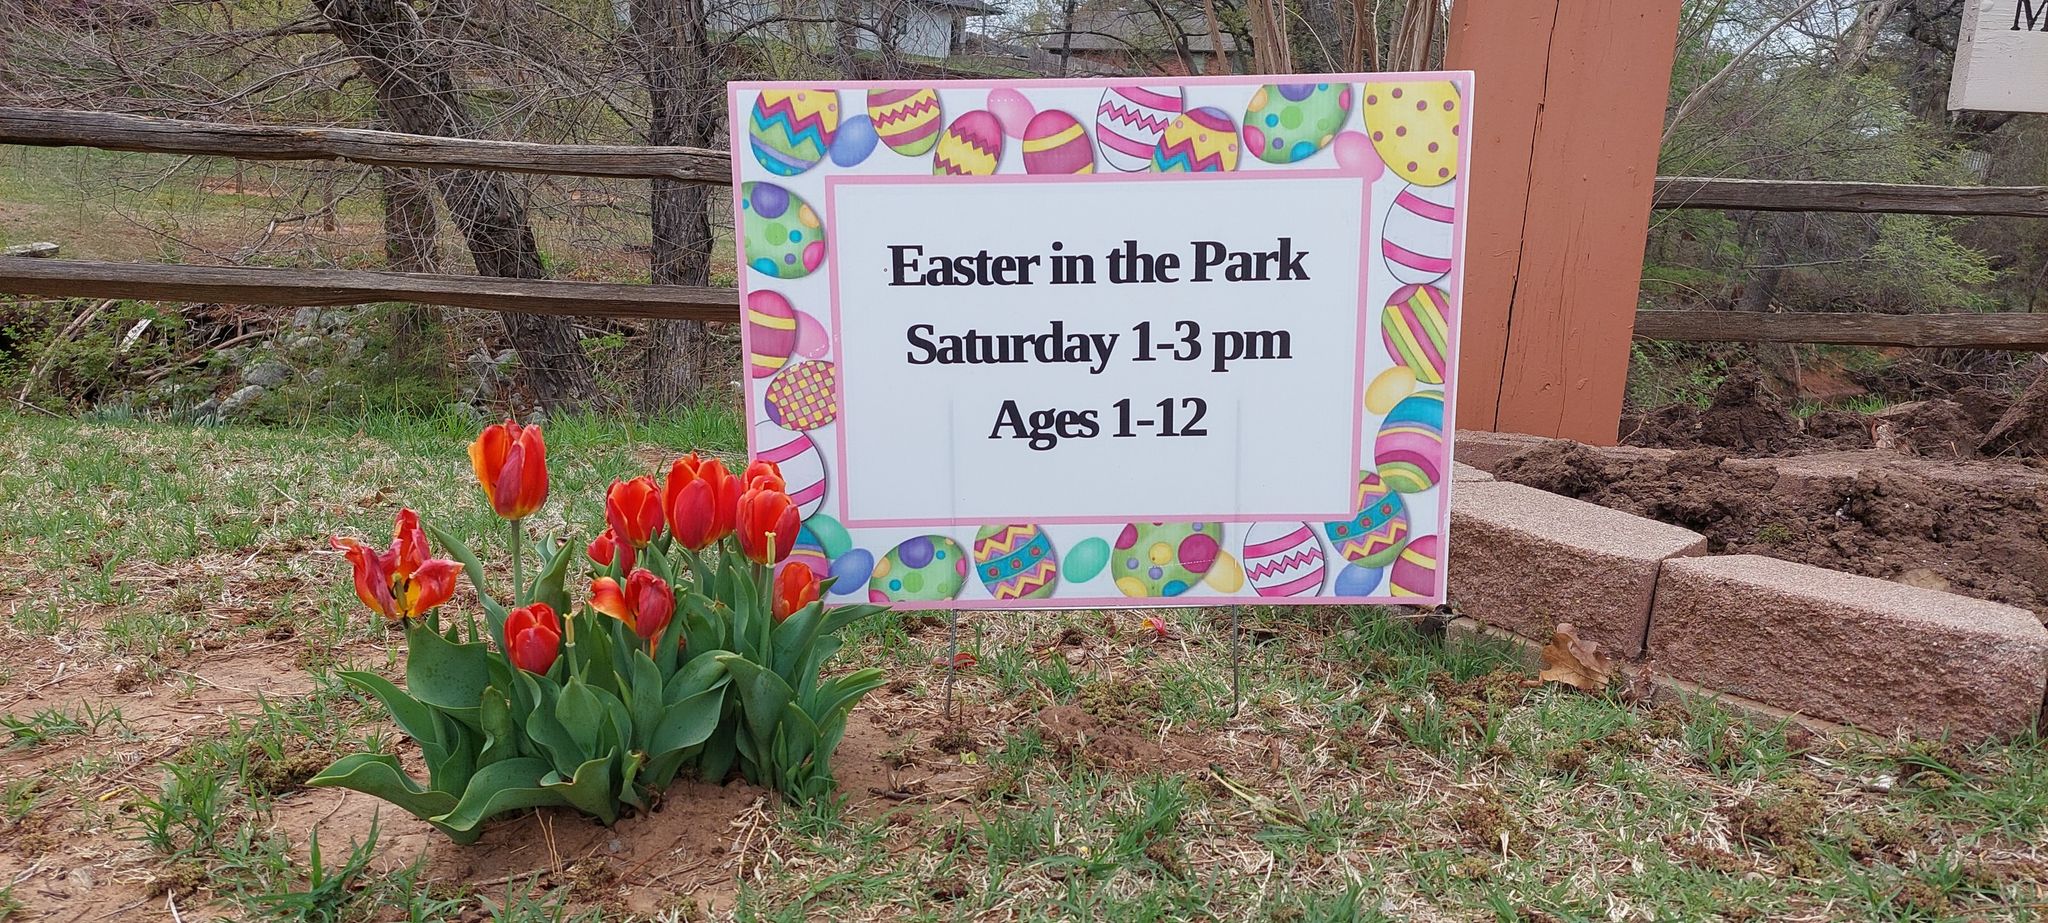 Tulips and a sign. Easter in the park. Saturday 1-3 pm. Ages 1-12.